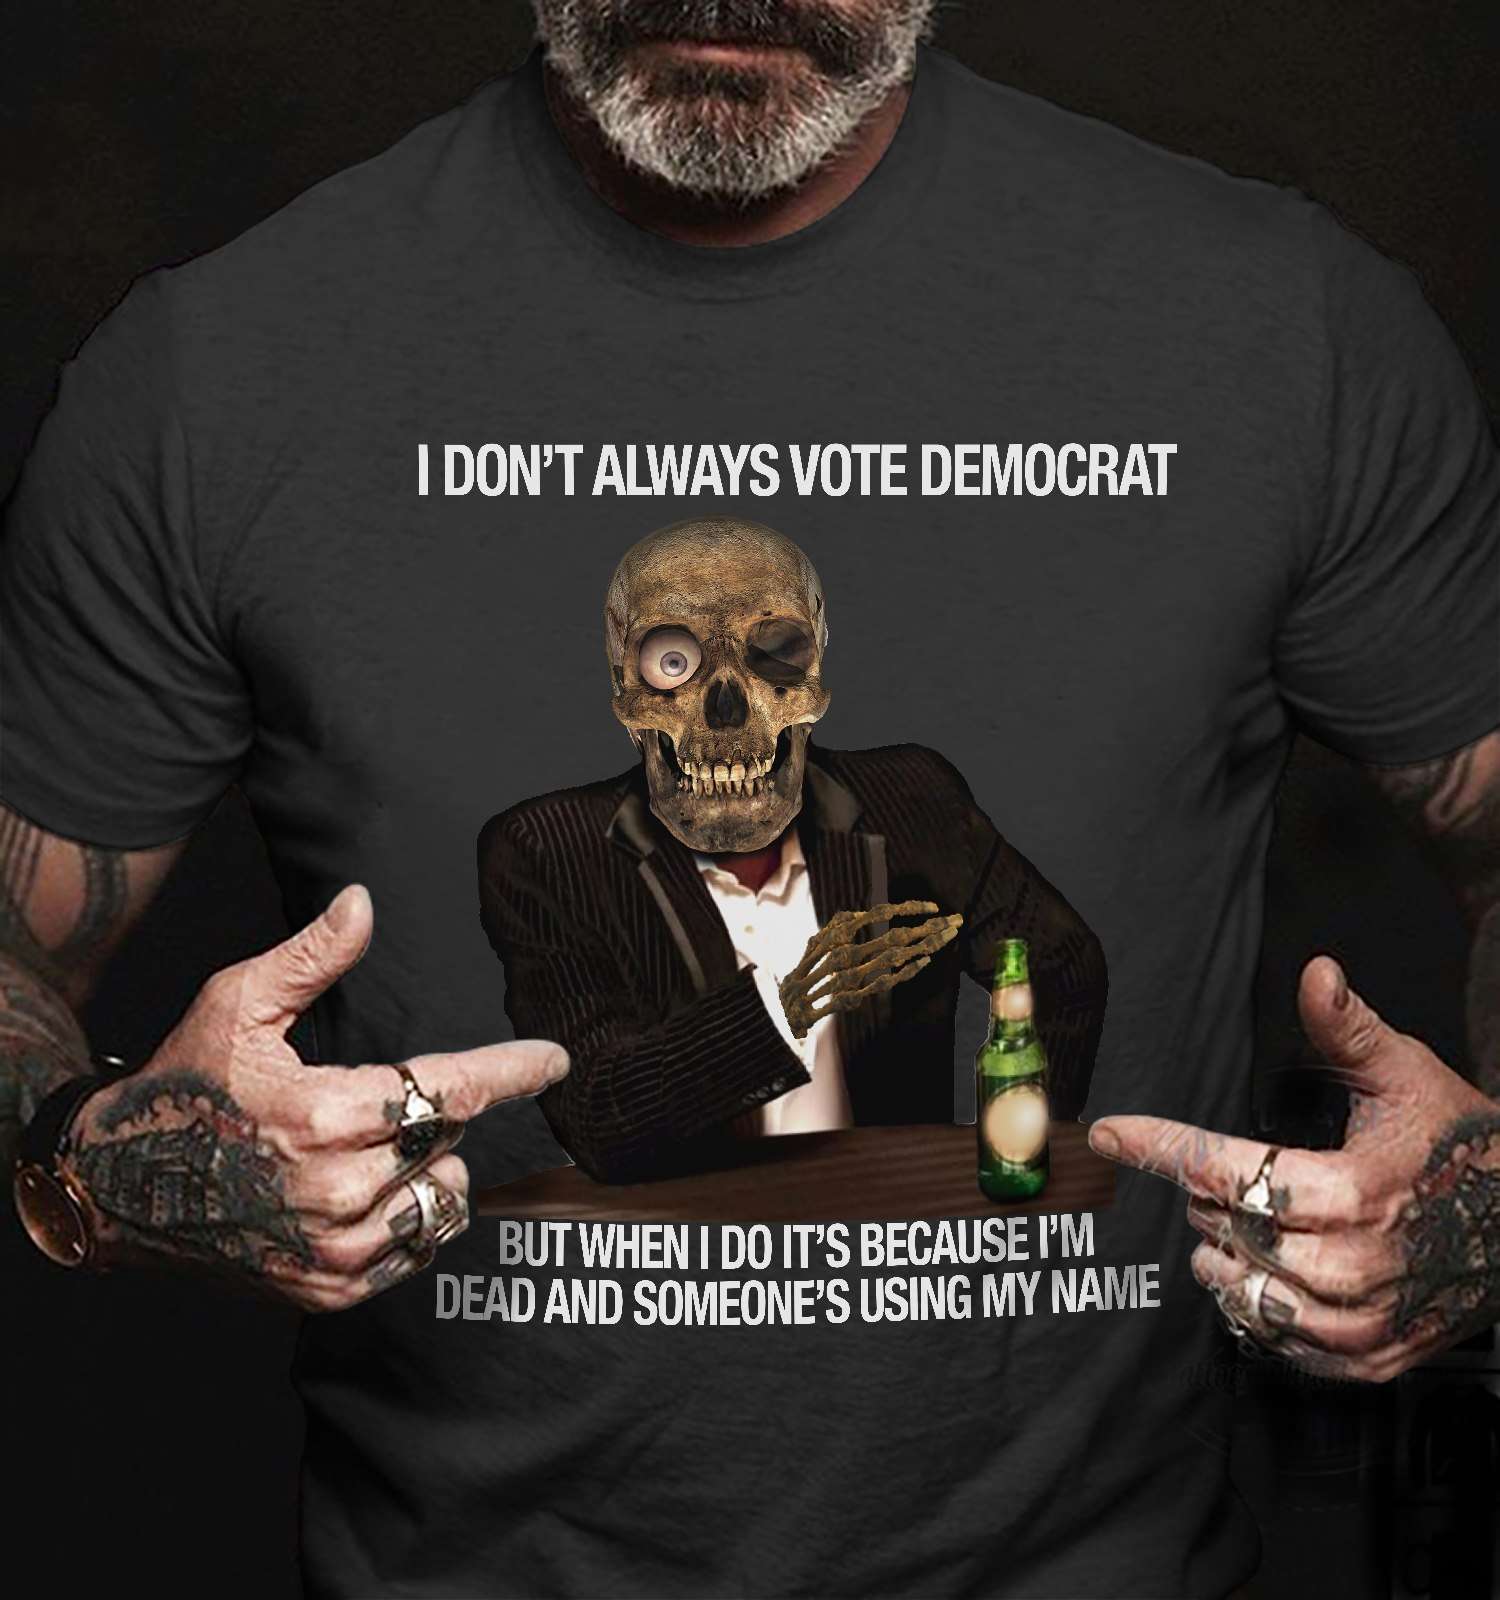 I don't always vote democrat but when I do it's because I'm dead and someone's using my name